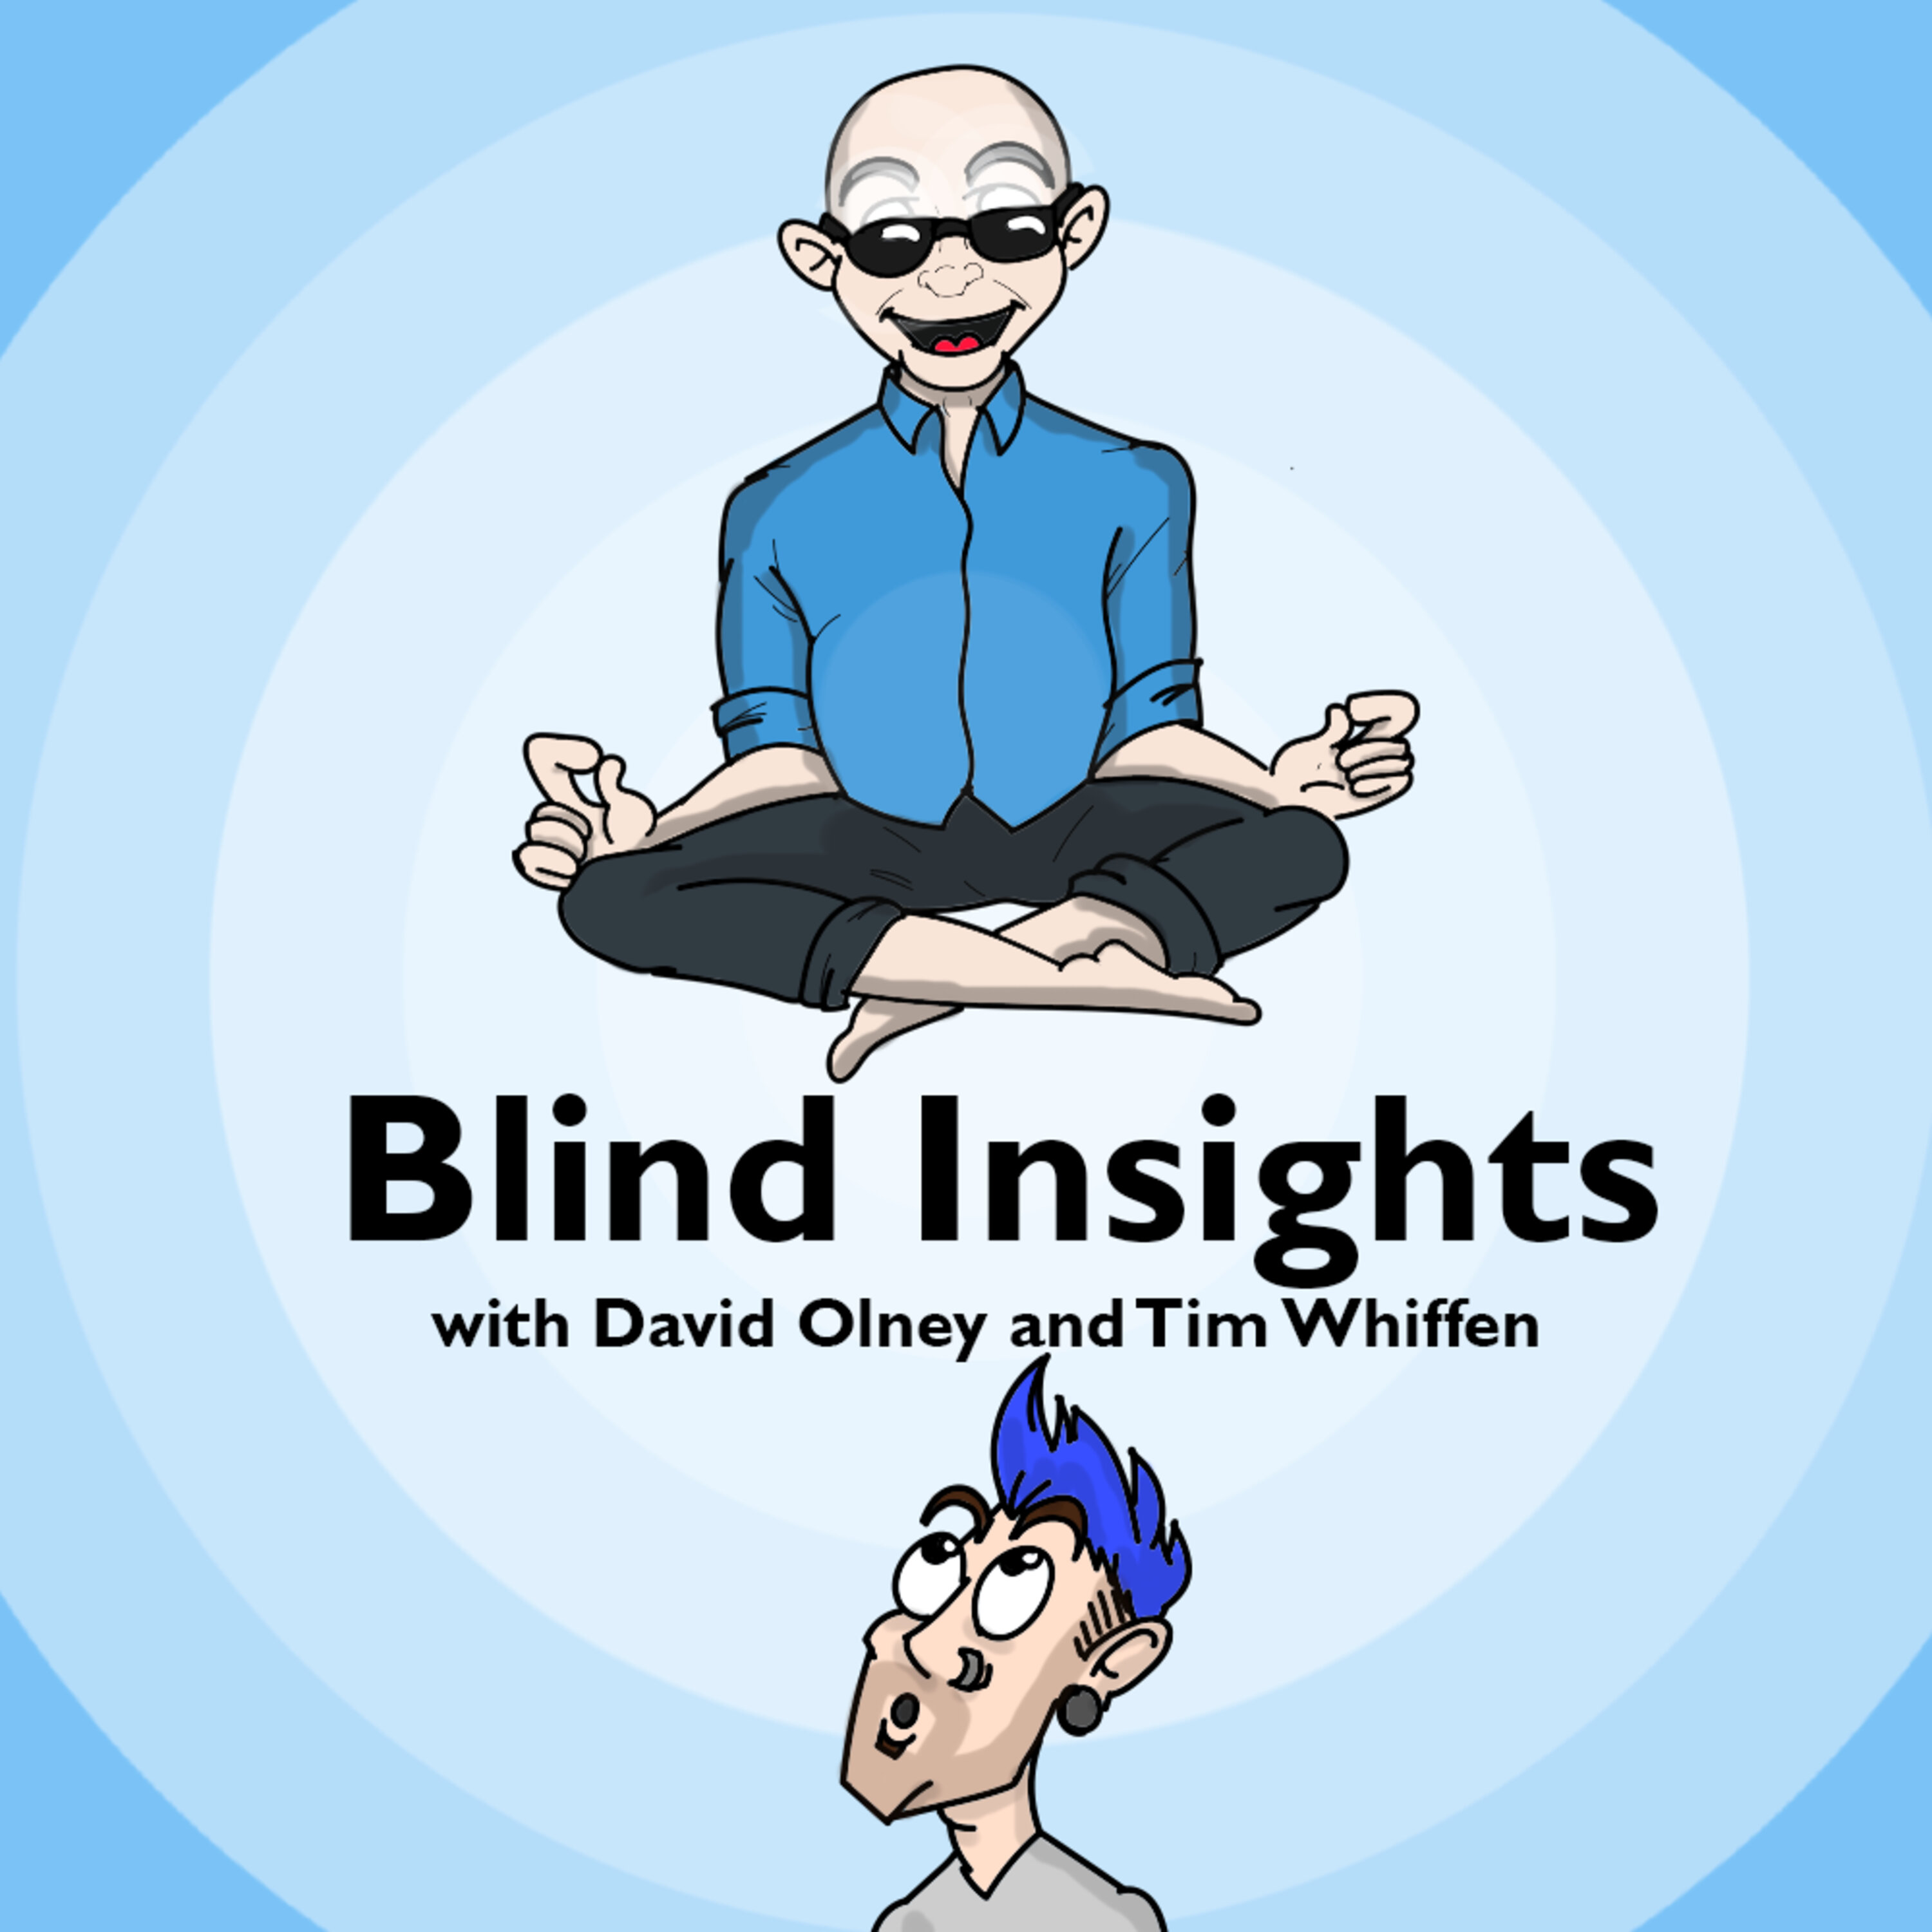 Blind Insights - Making the Climate Better (Special Guest Amelia Chaplin)